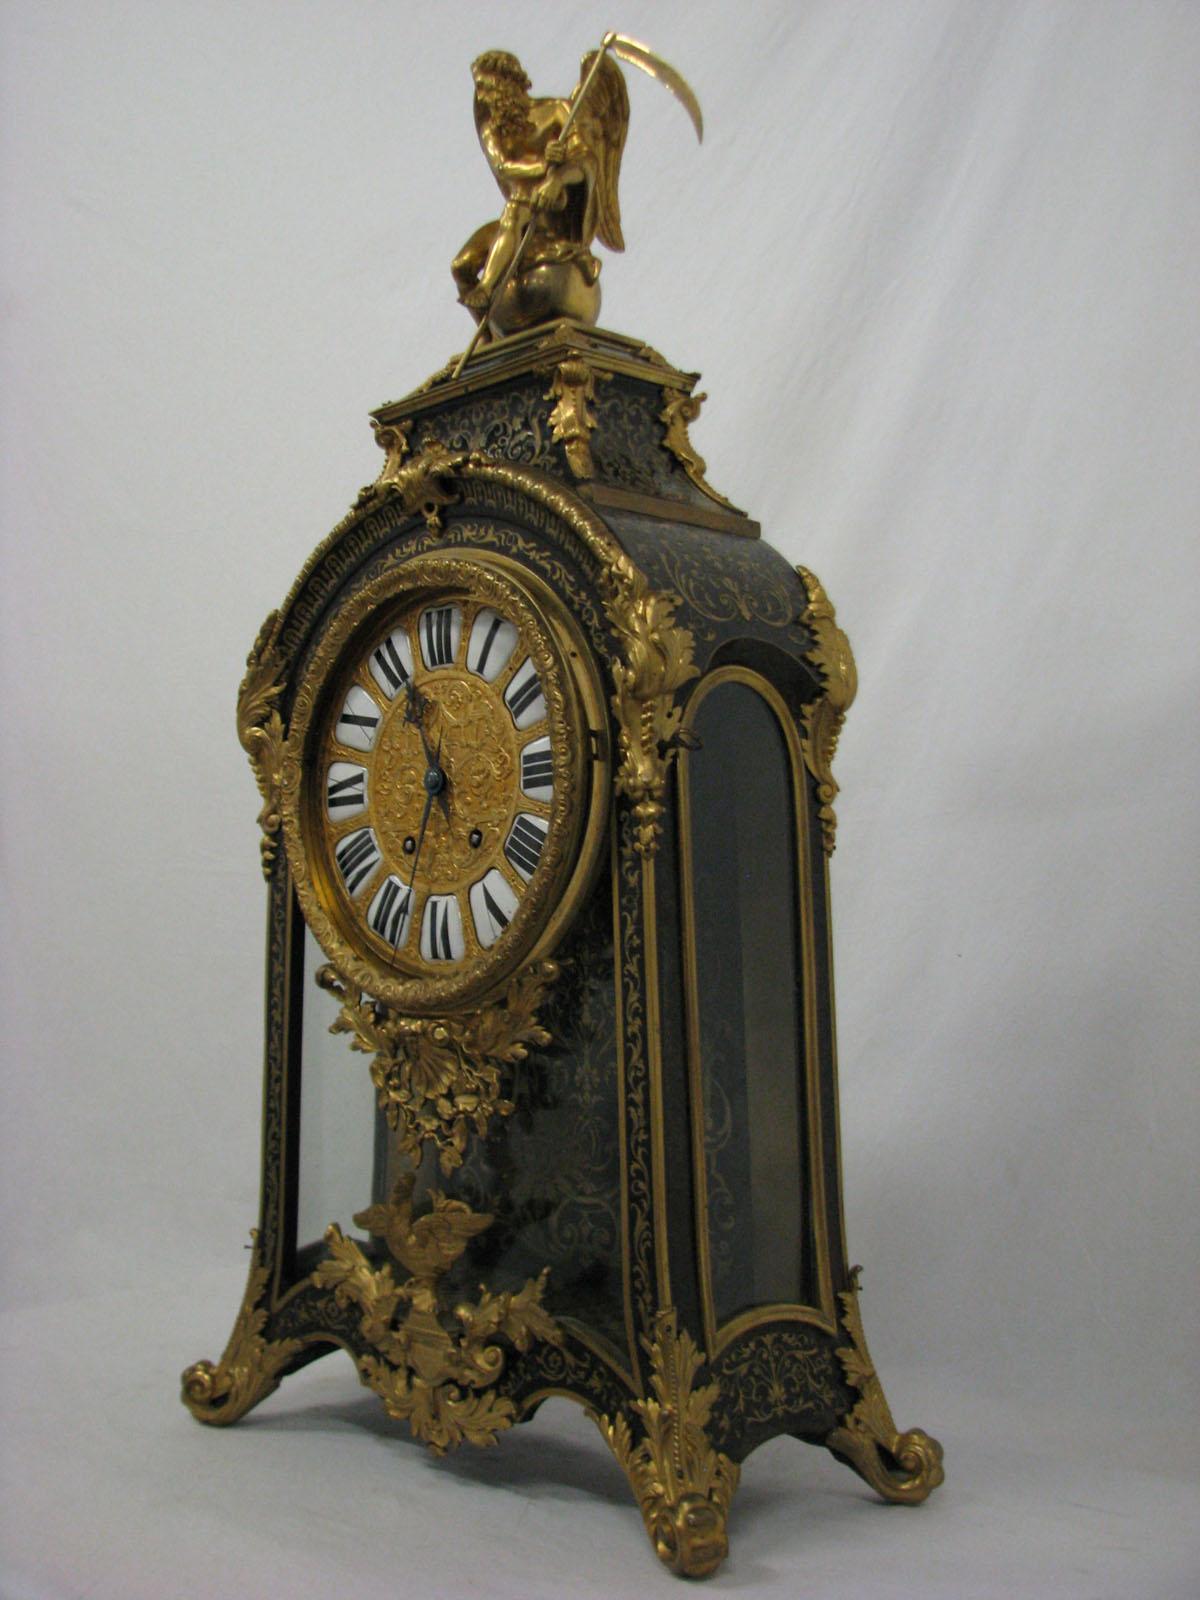 19th century Boulle mantel clock, 18th century model
A prestigious museum-class mantel clock of almost a meter height,
made around the mid-19th century (according to the 18th century pattern) in Boulle technique and style,
being the most